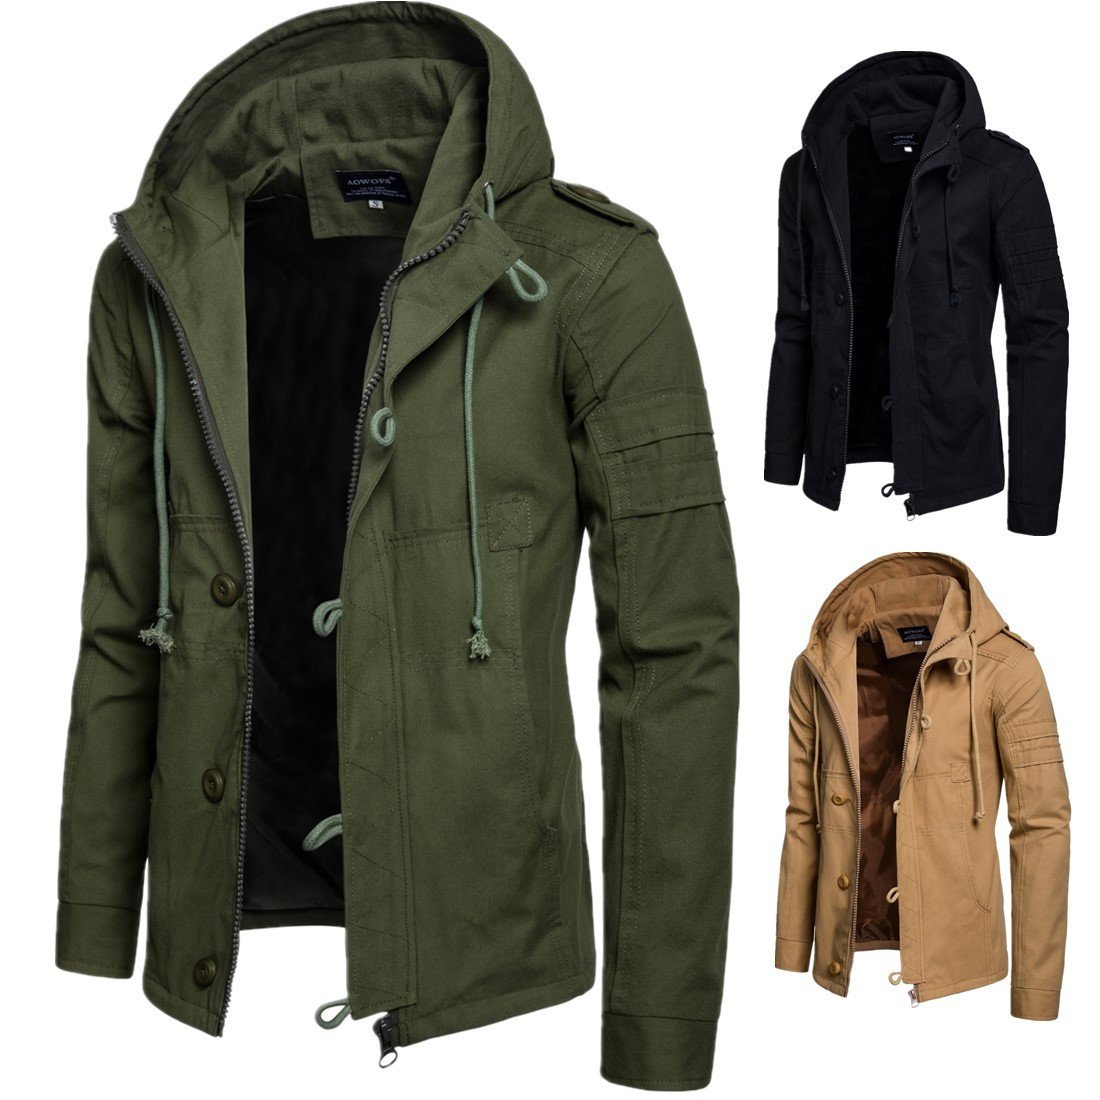 Men`s casual jacket with buttons and hood in three colors